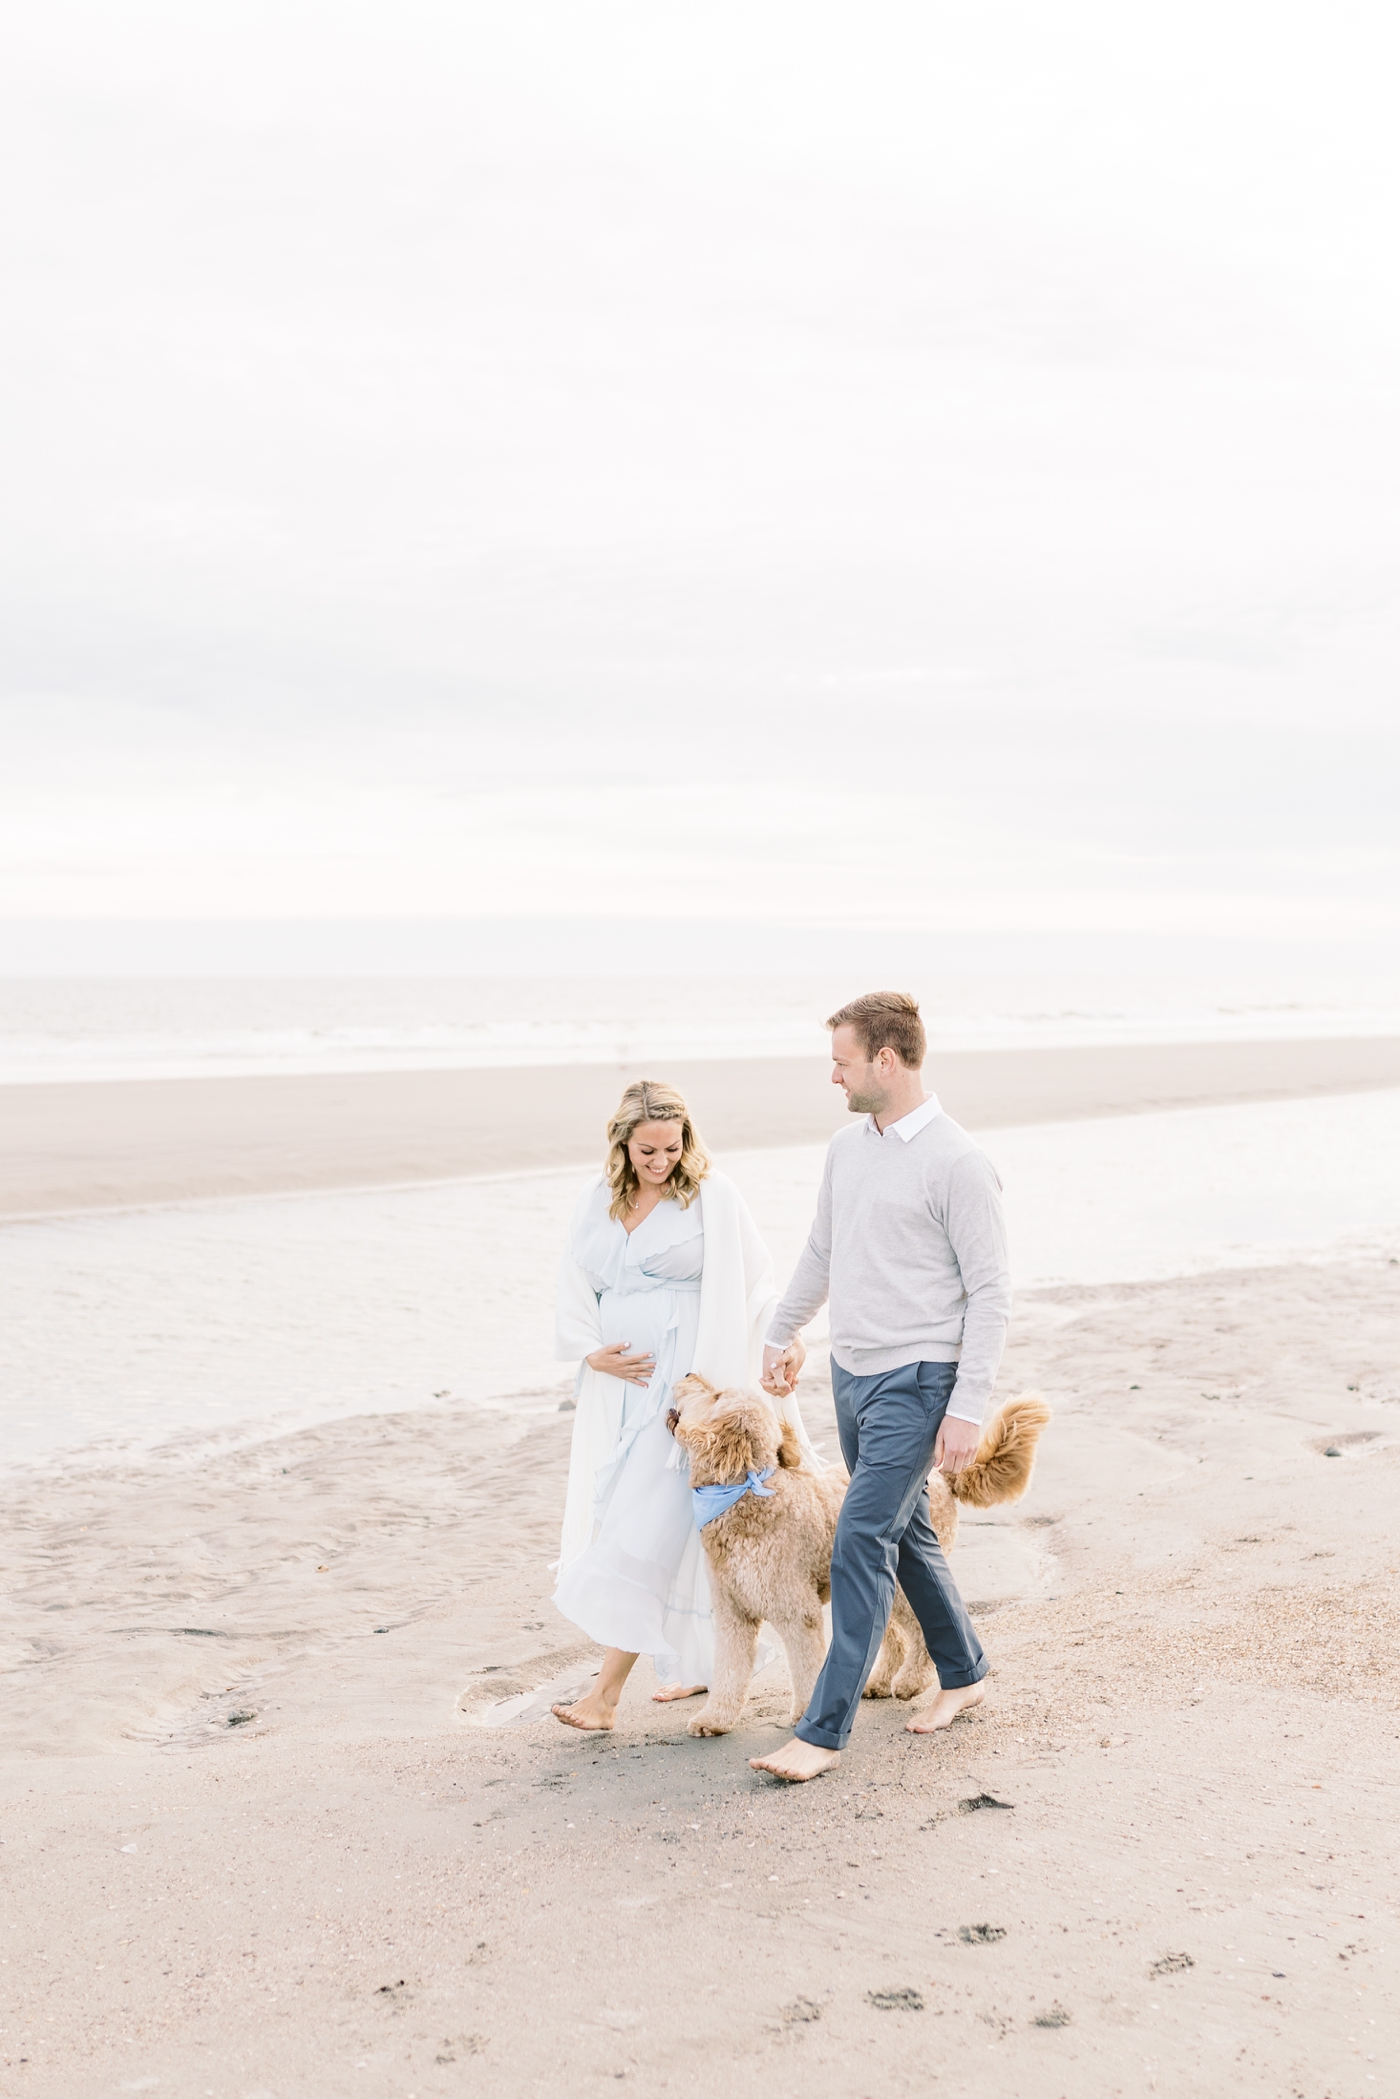 Couple walking on the beach with Goldendoodle. Photos by Caitlyn Motycka Photography.